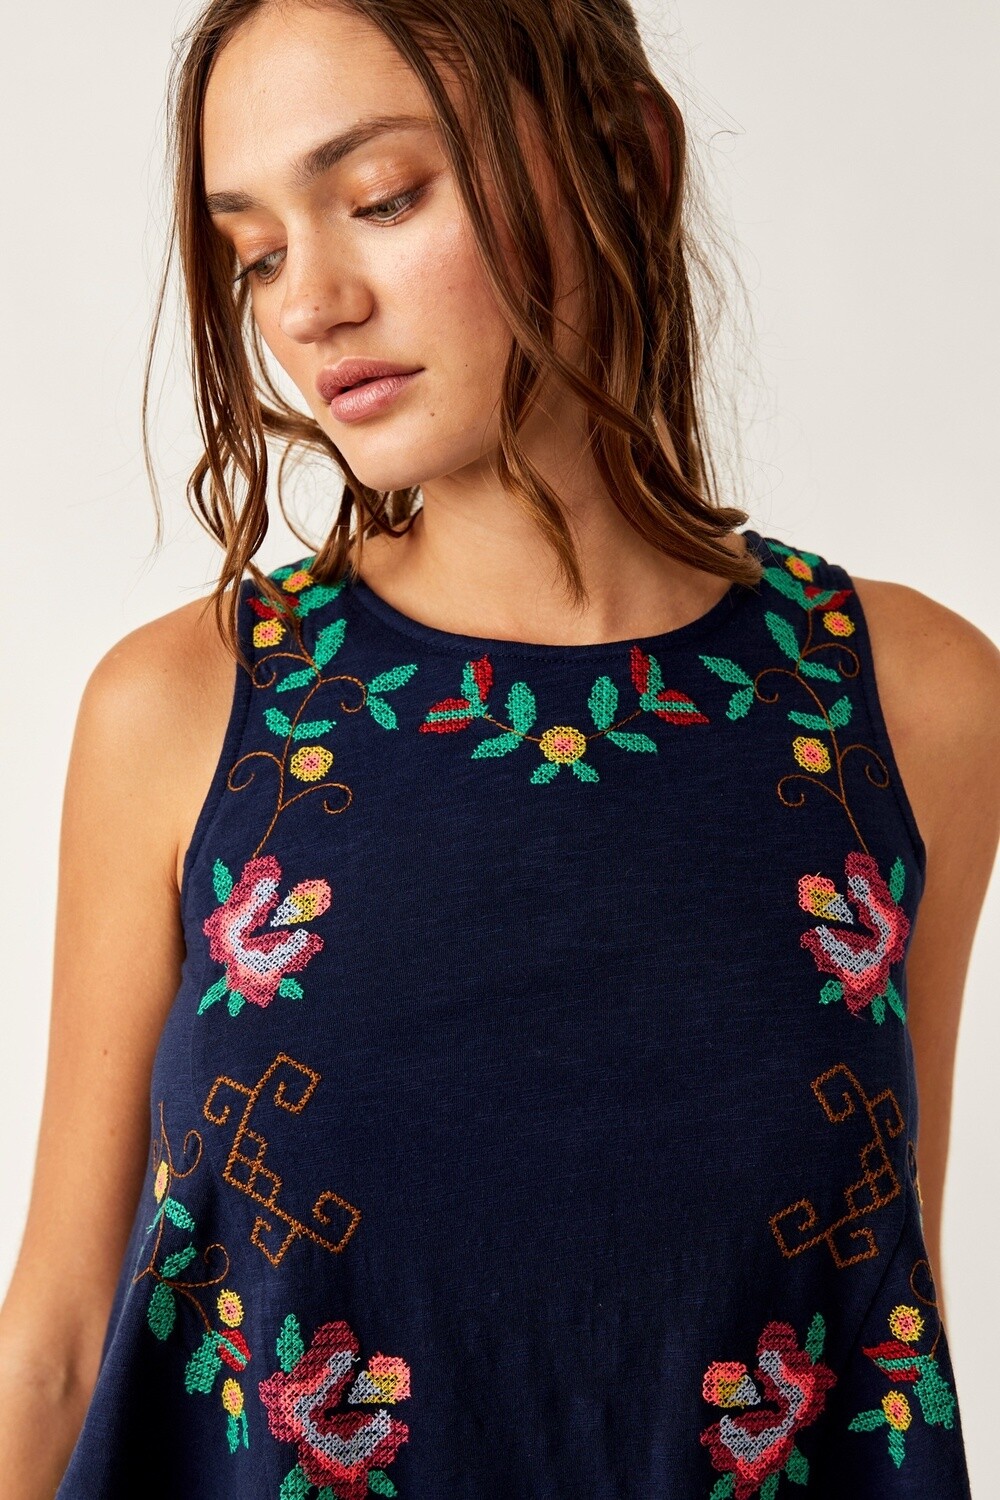 Fun And Flirty Embroidered Top, Color: Cobalt Combo, Size: XS